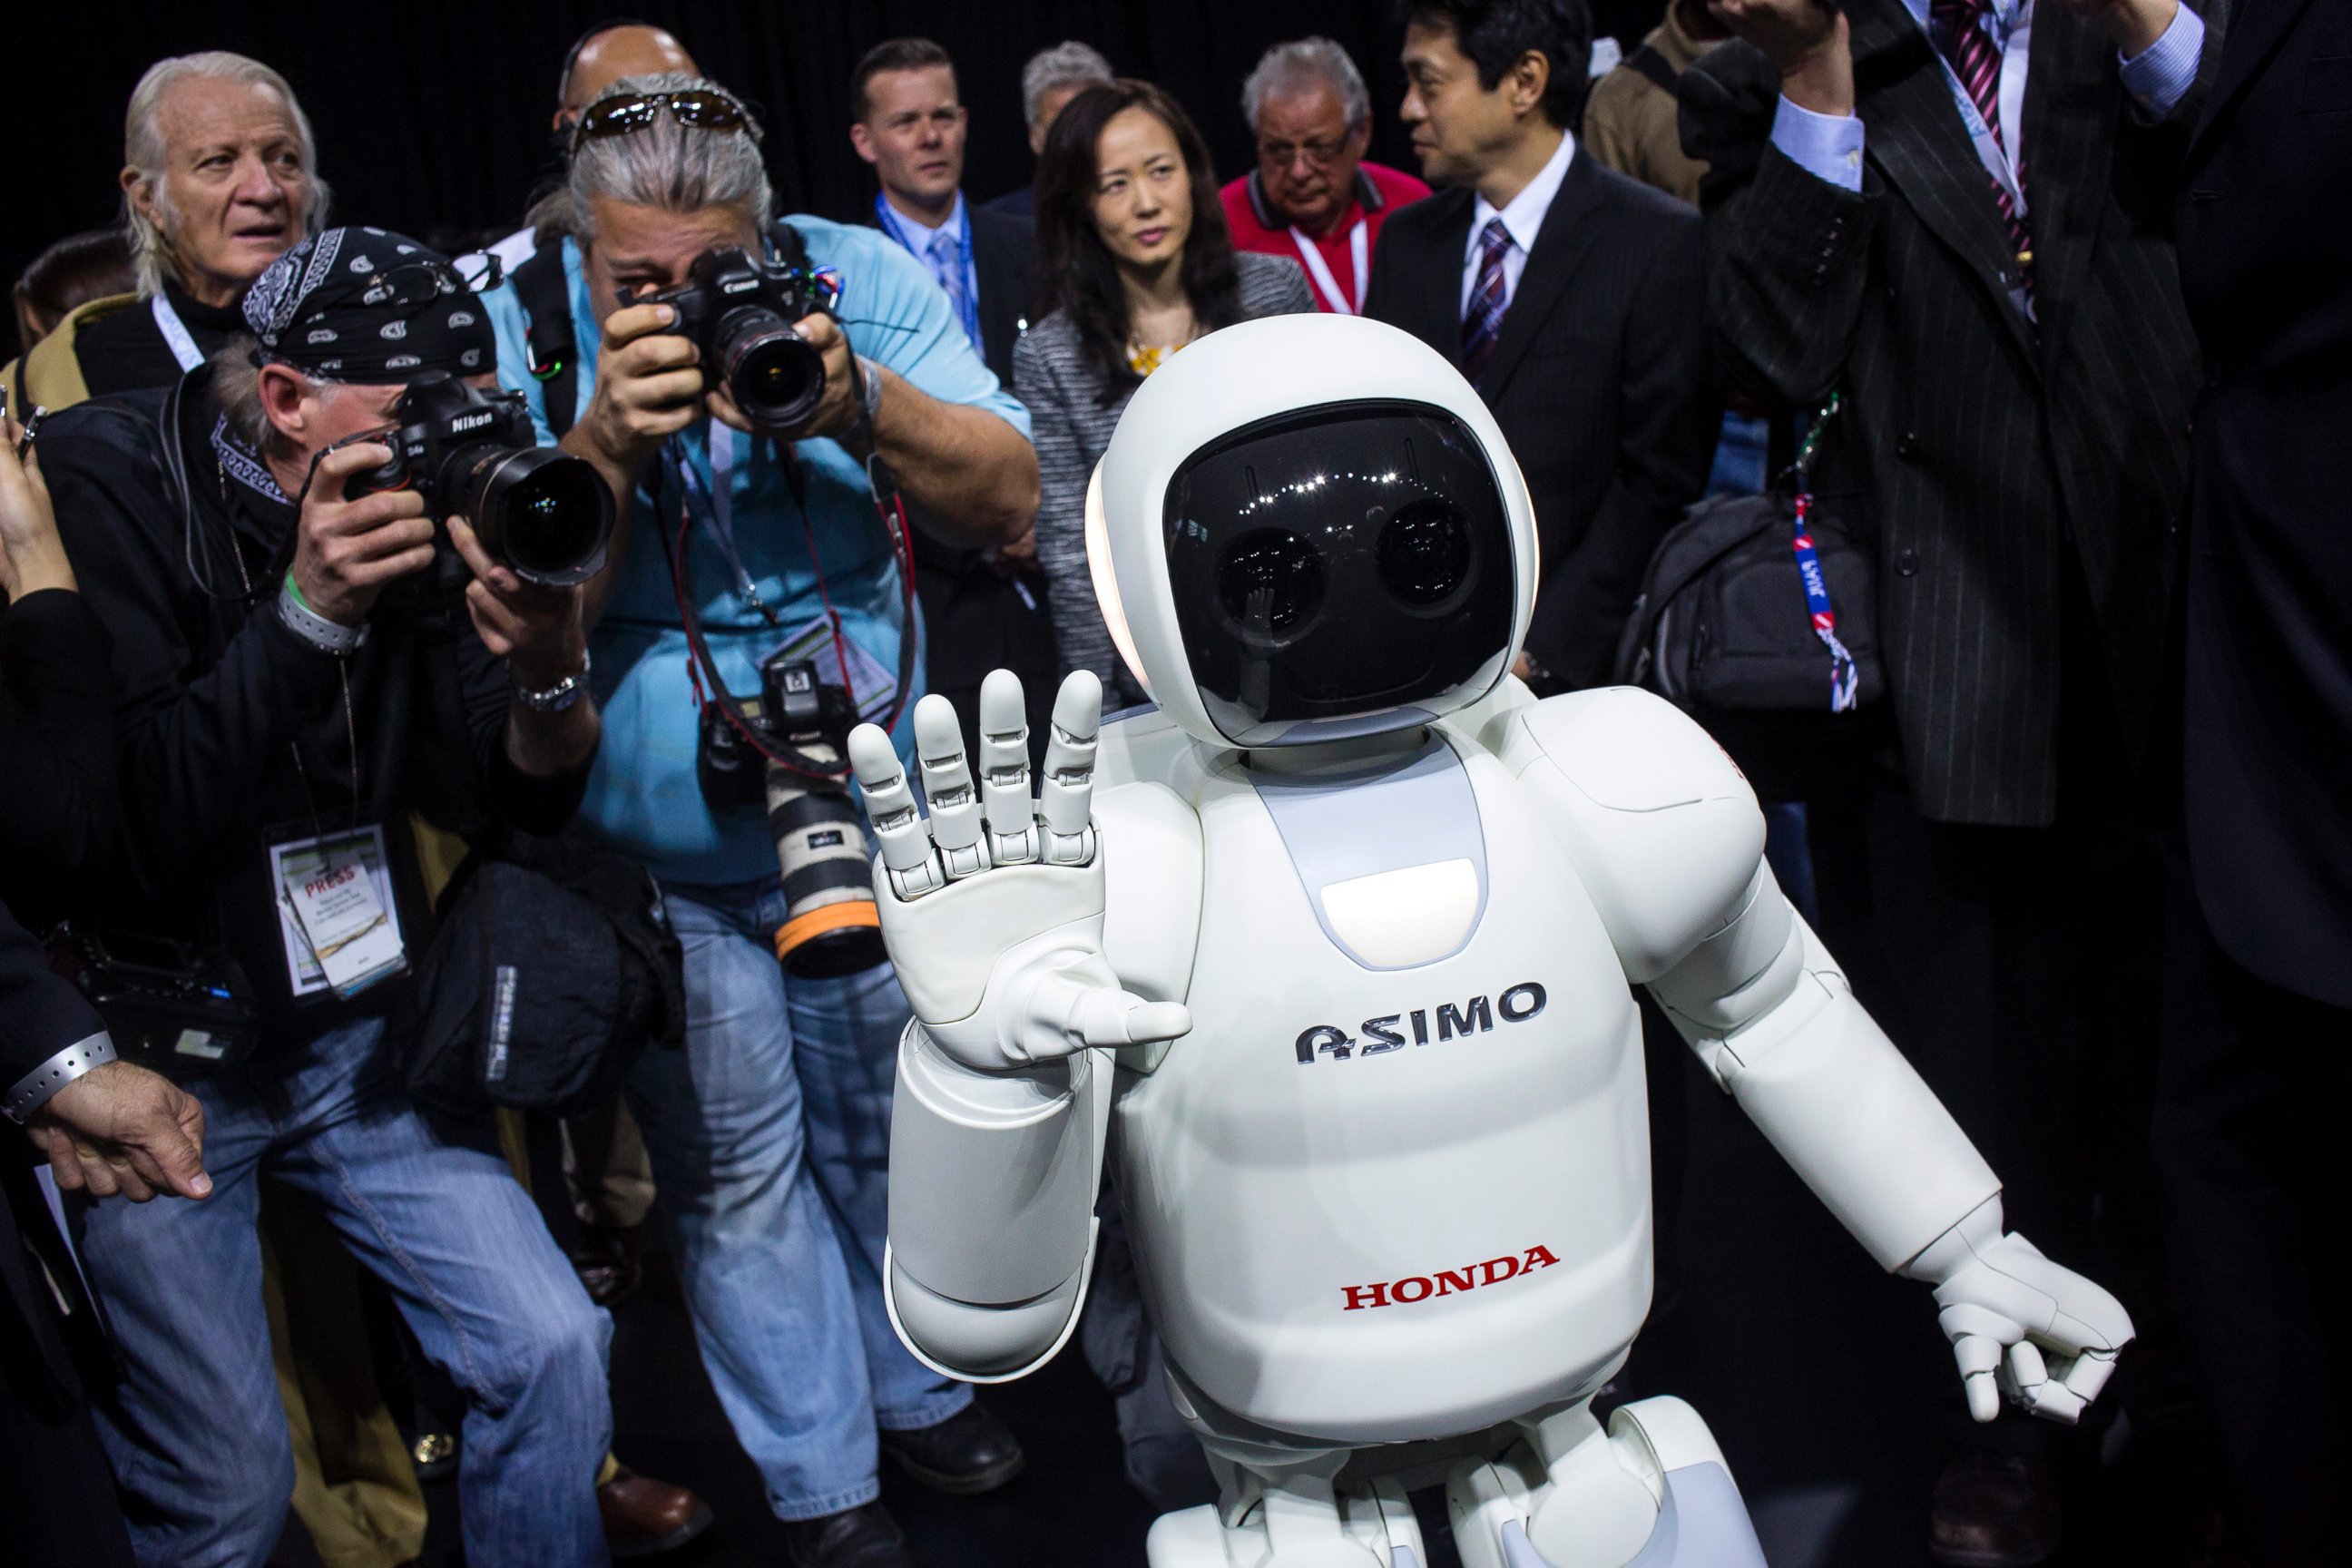 PHOTO: Honda Motors demonstrates its Asimo robot during a media preview of the 2014 New York International Auto Show in New York. The show opens with a sneak preview to the public April 18 and runs through April 27.